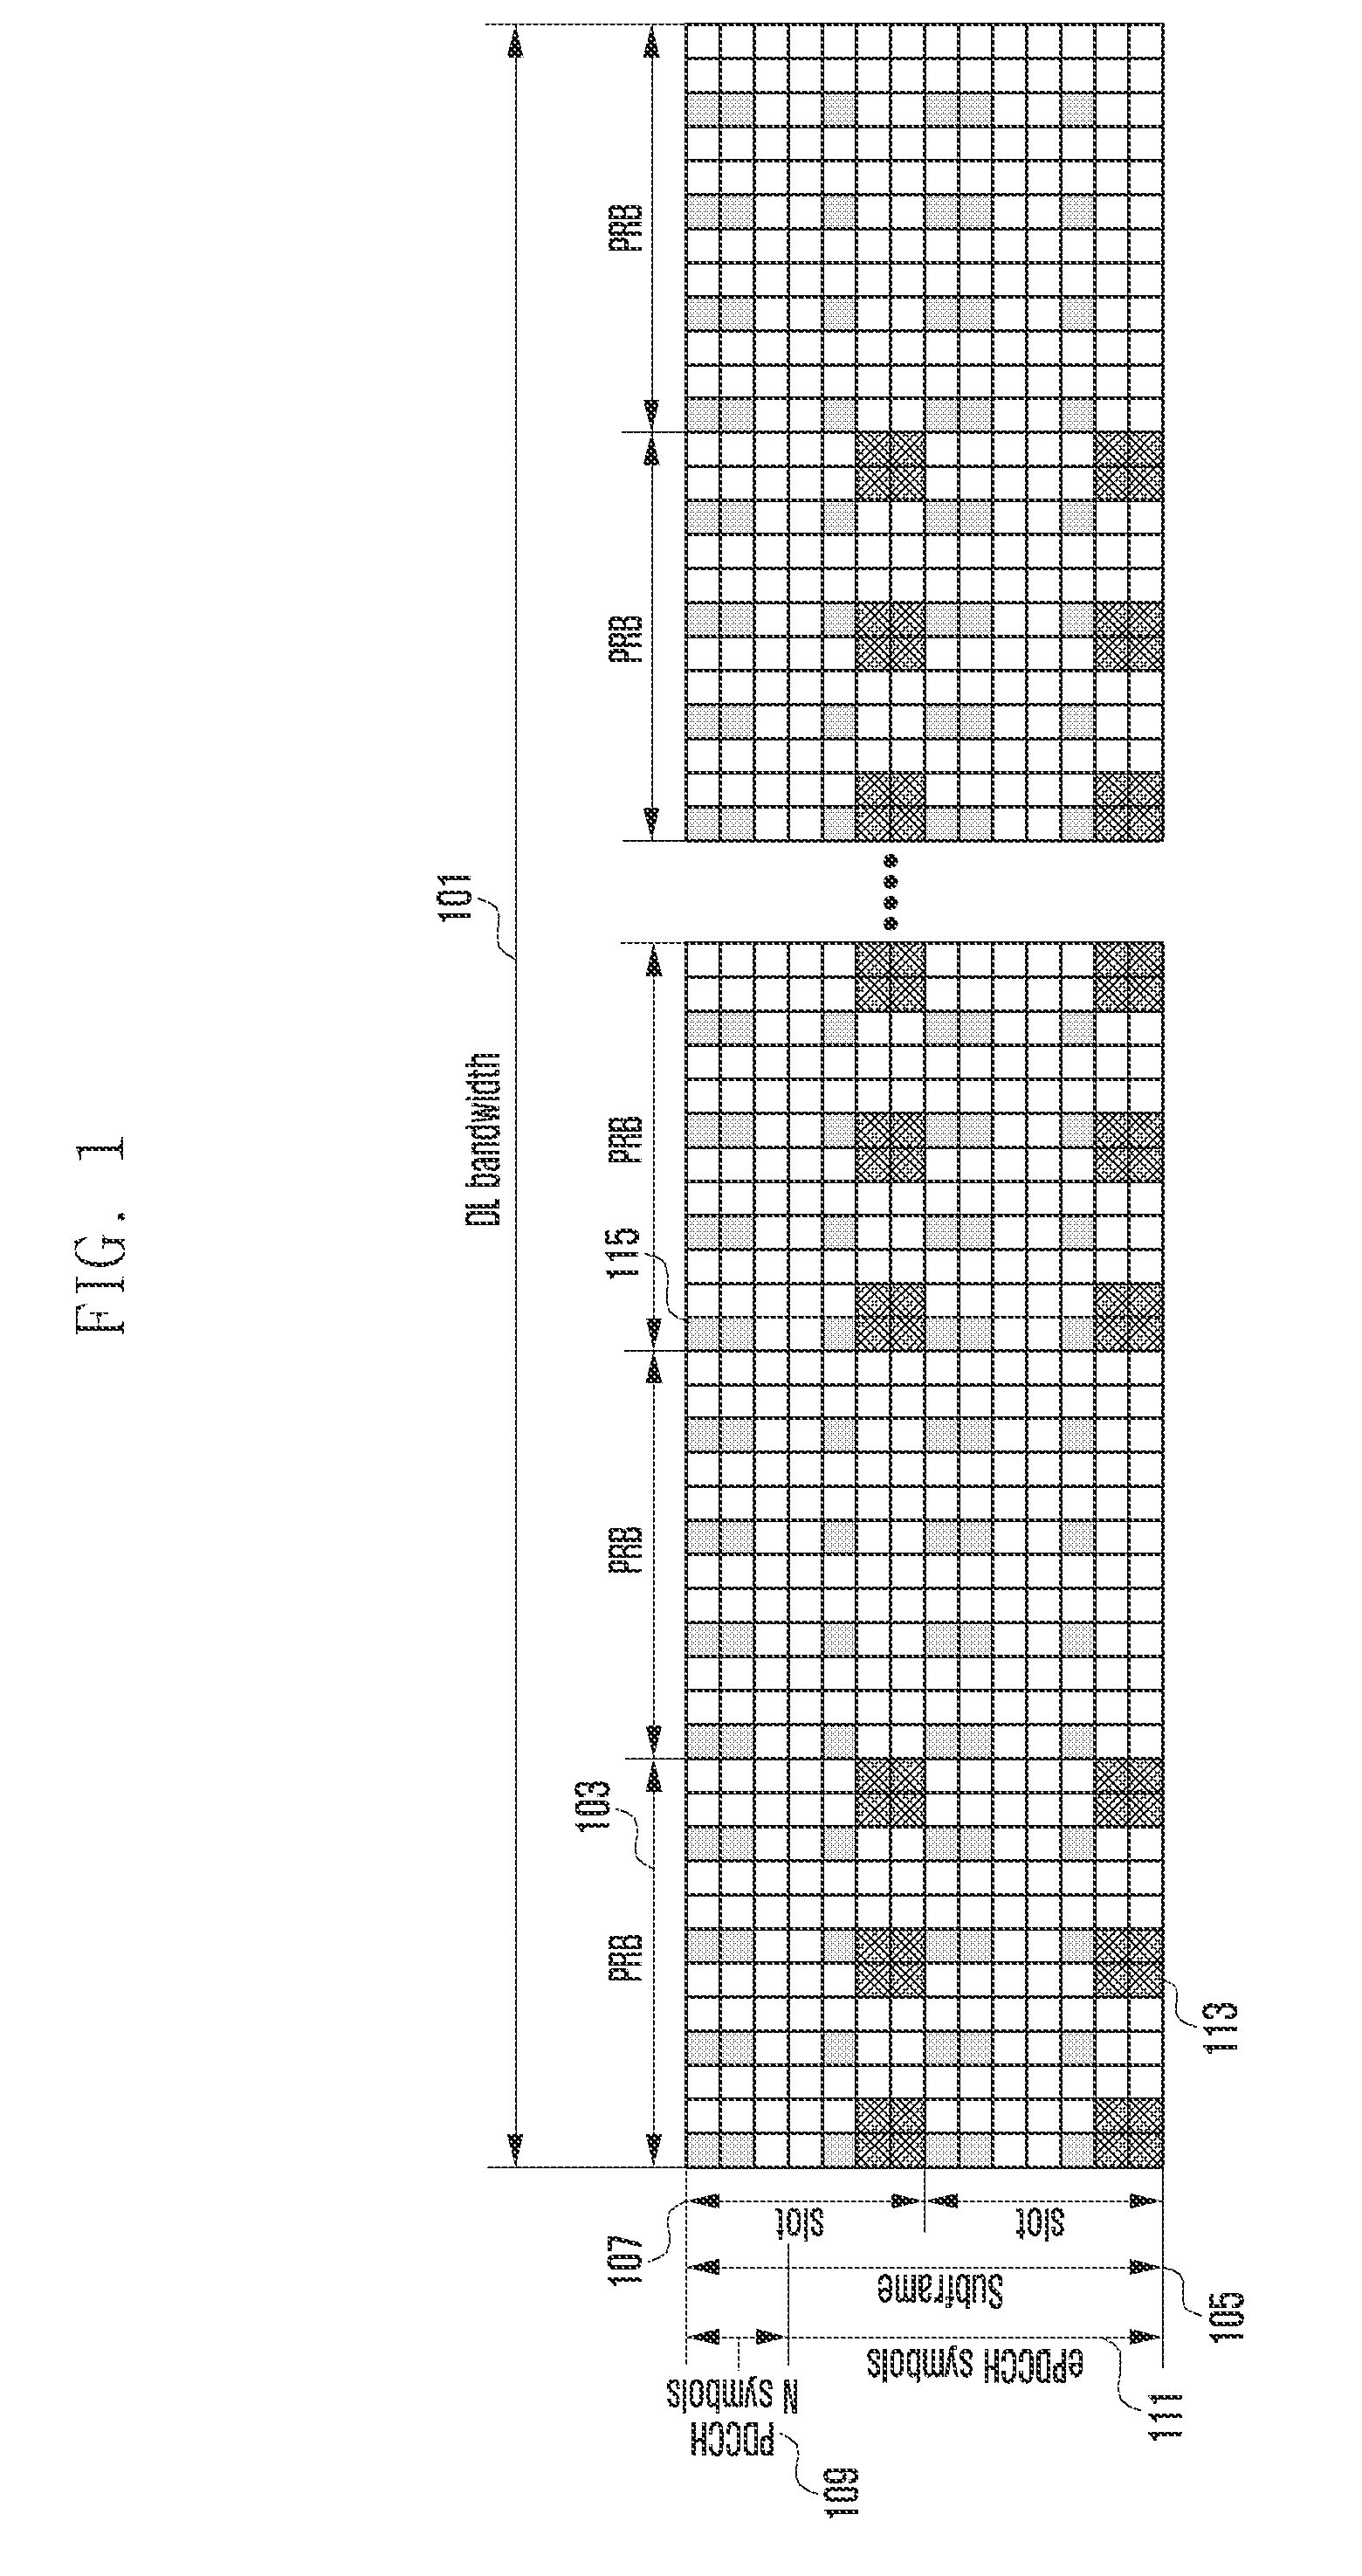 Downlink power control method and apparatus of OFDM system